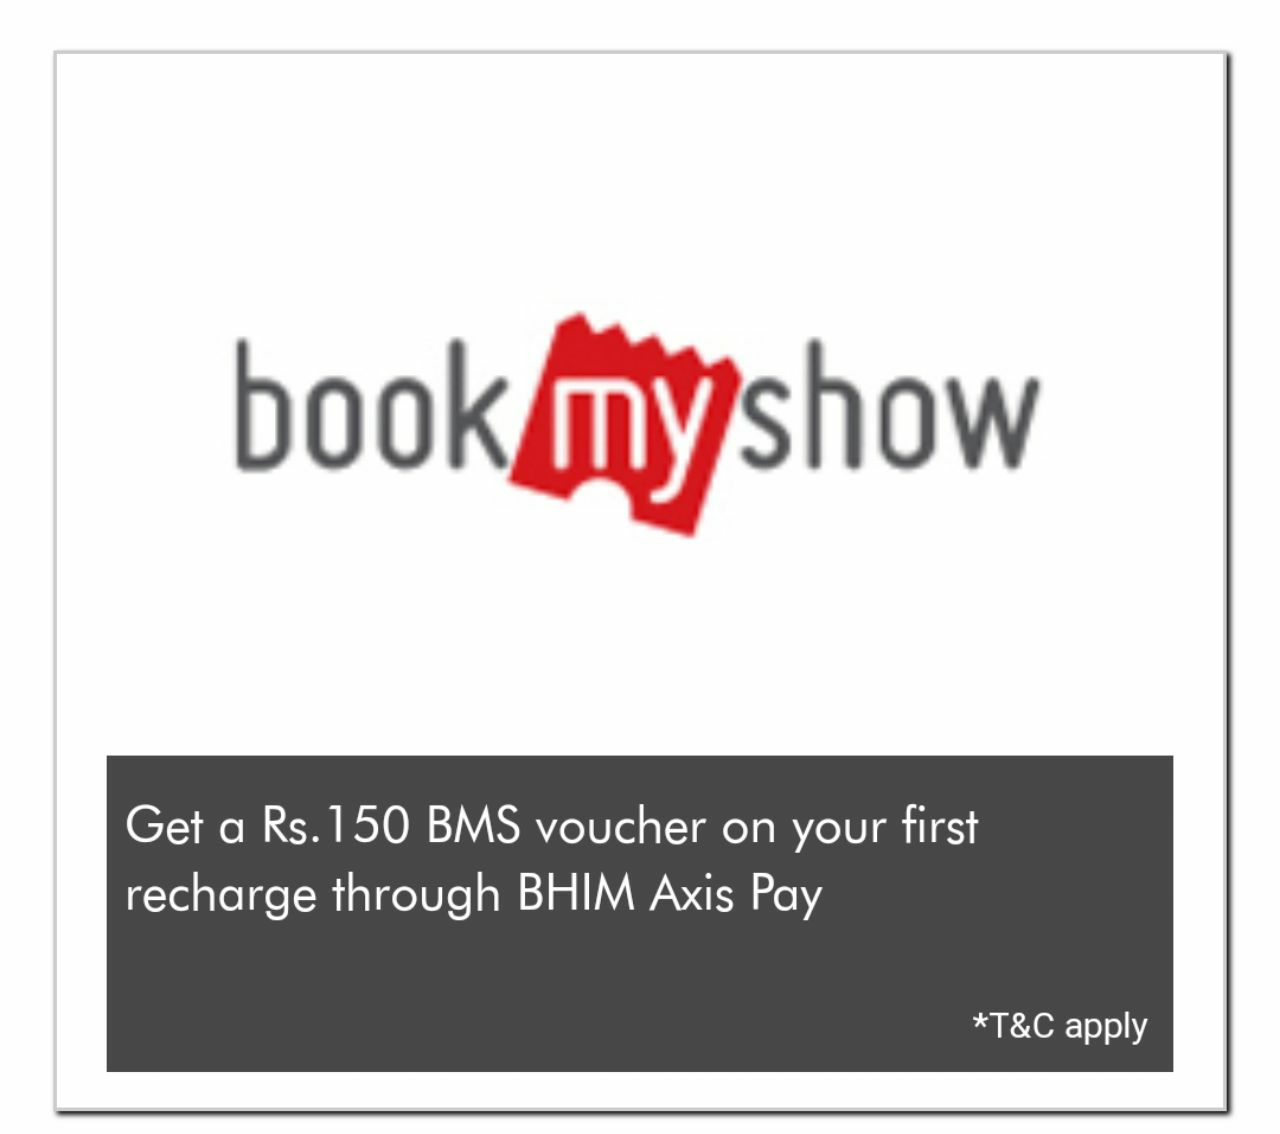 Bhim Axis Pay - Get Rs.150 BMS Voucher on Your First Recharge Through BHIM Axis Pay